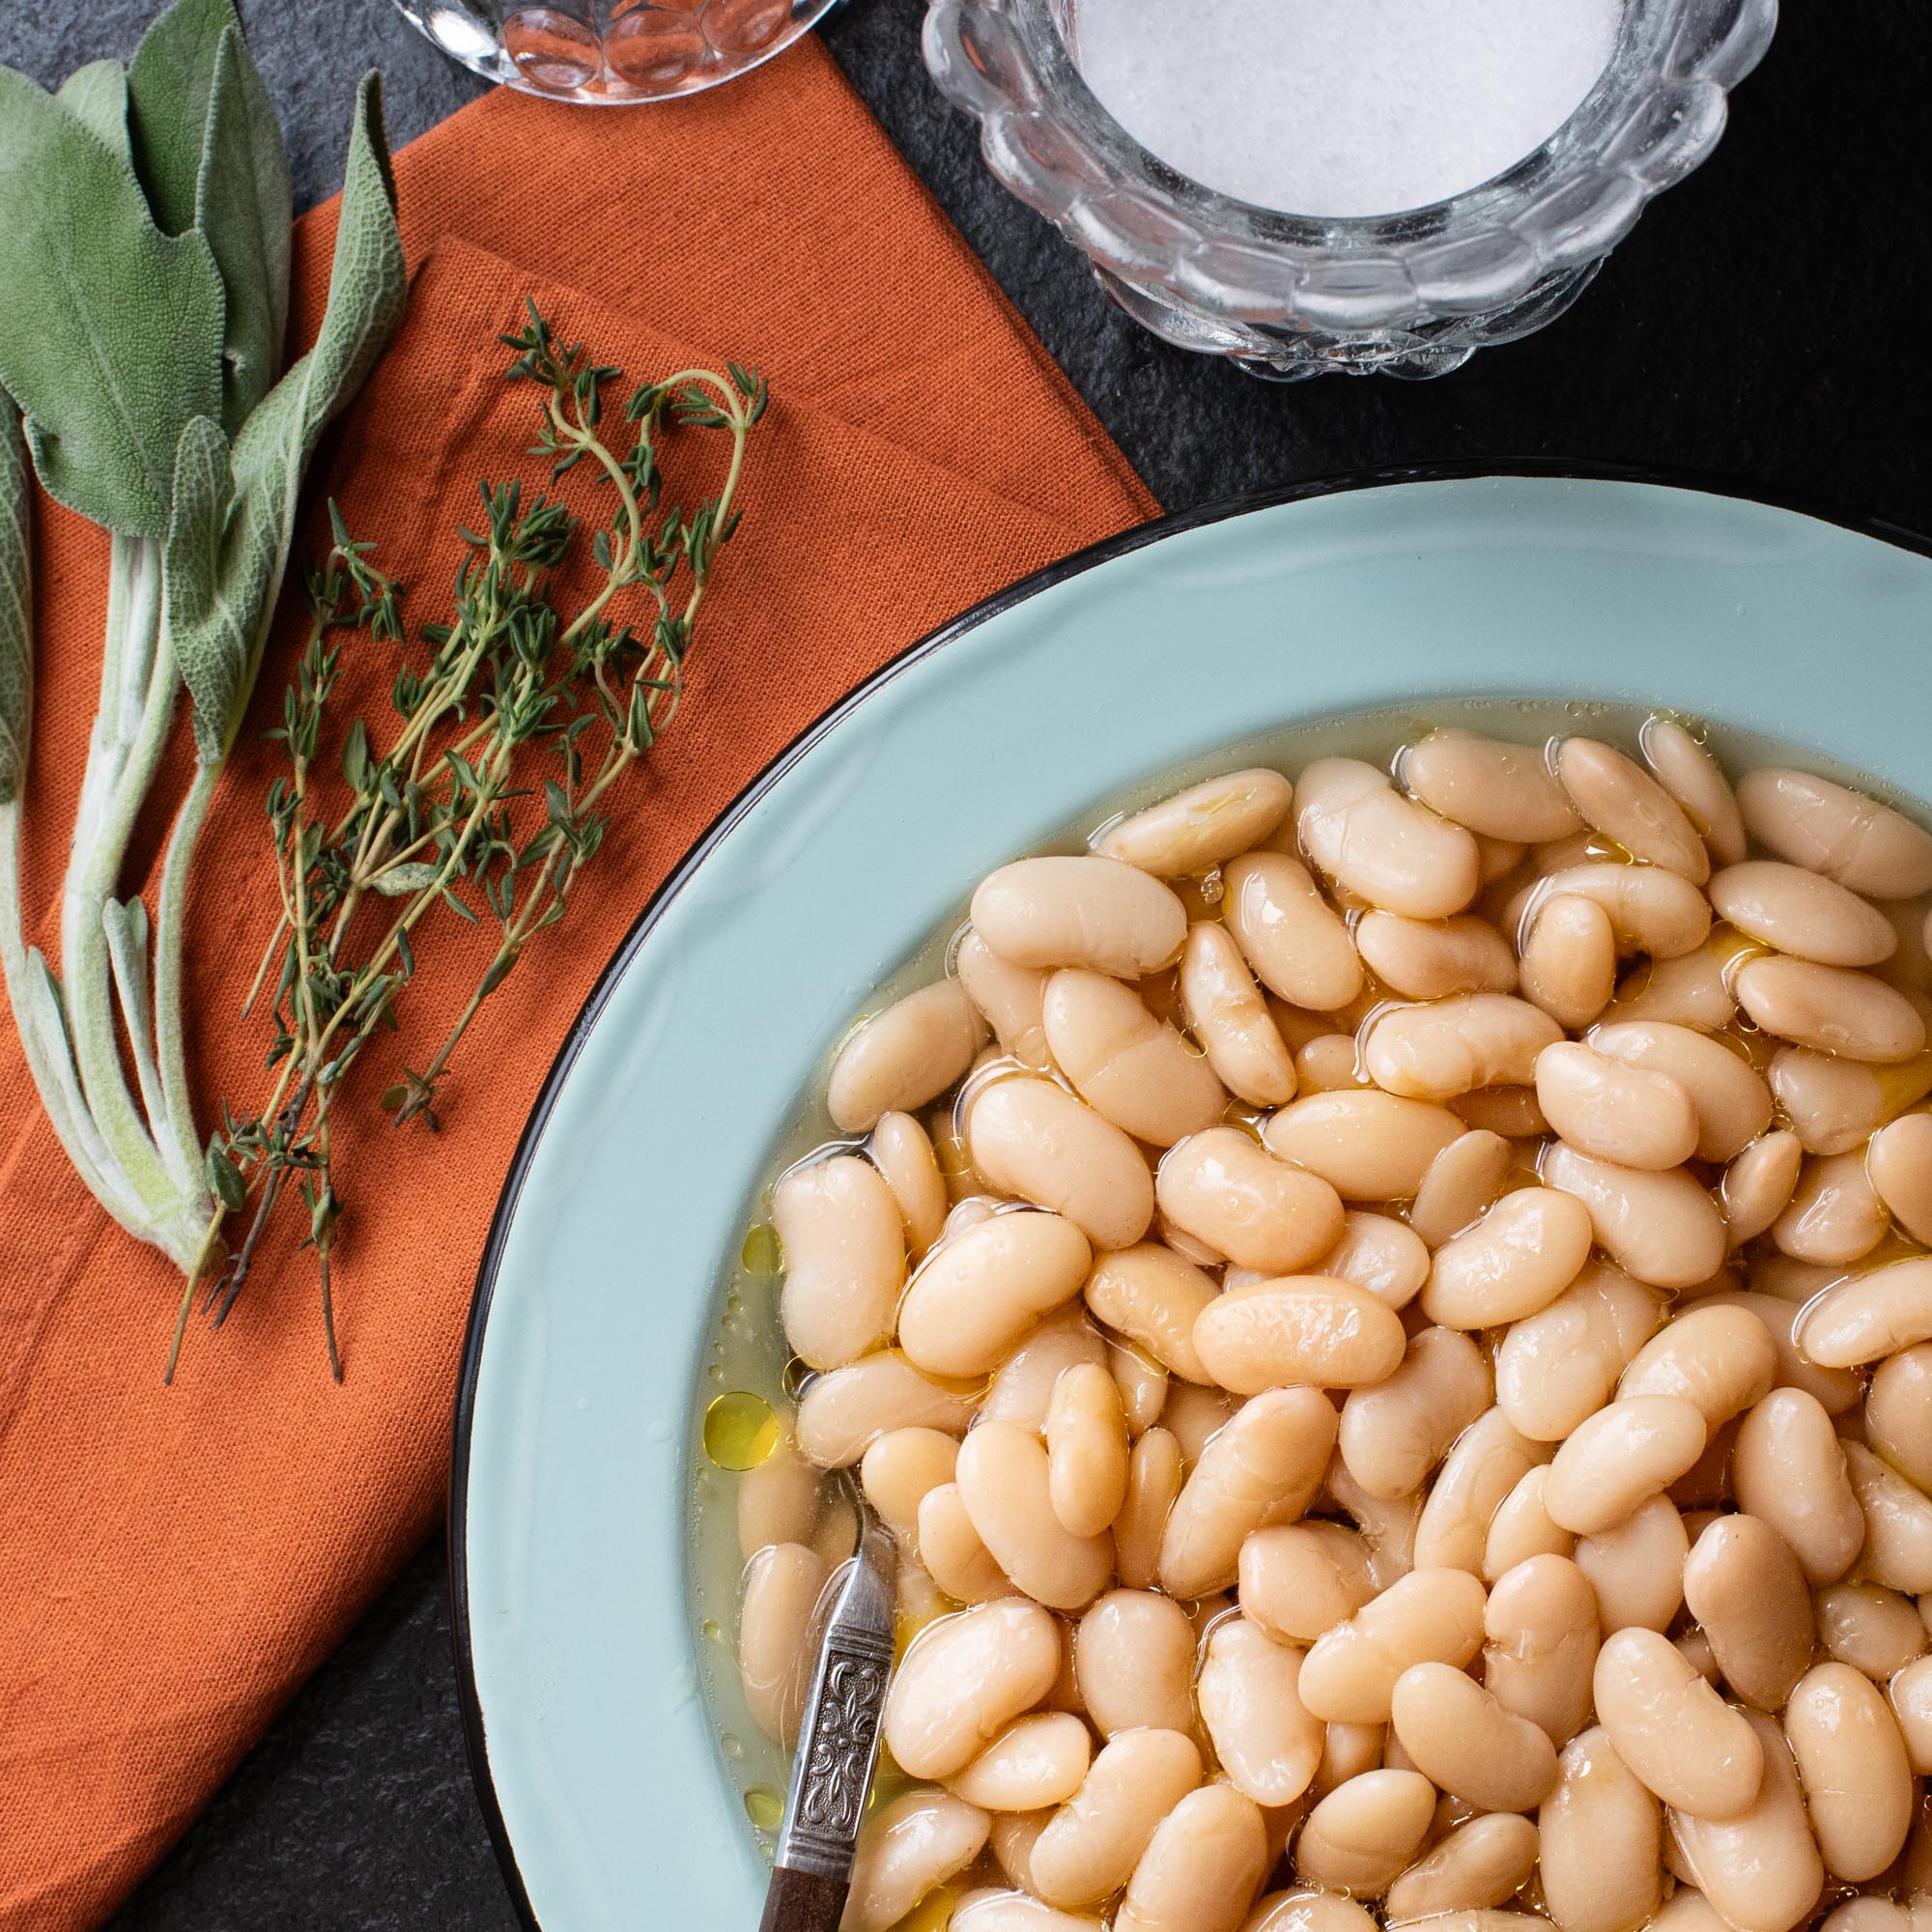 Primary Beans Organic Classic Flat White cassoulet beans brothy